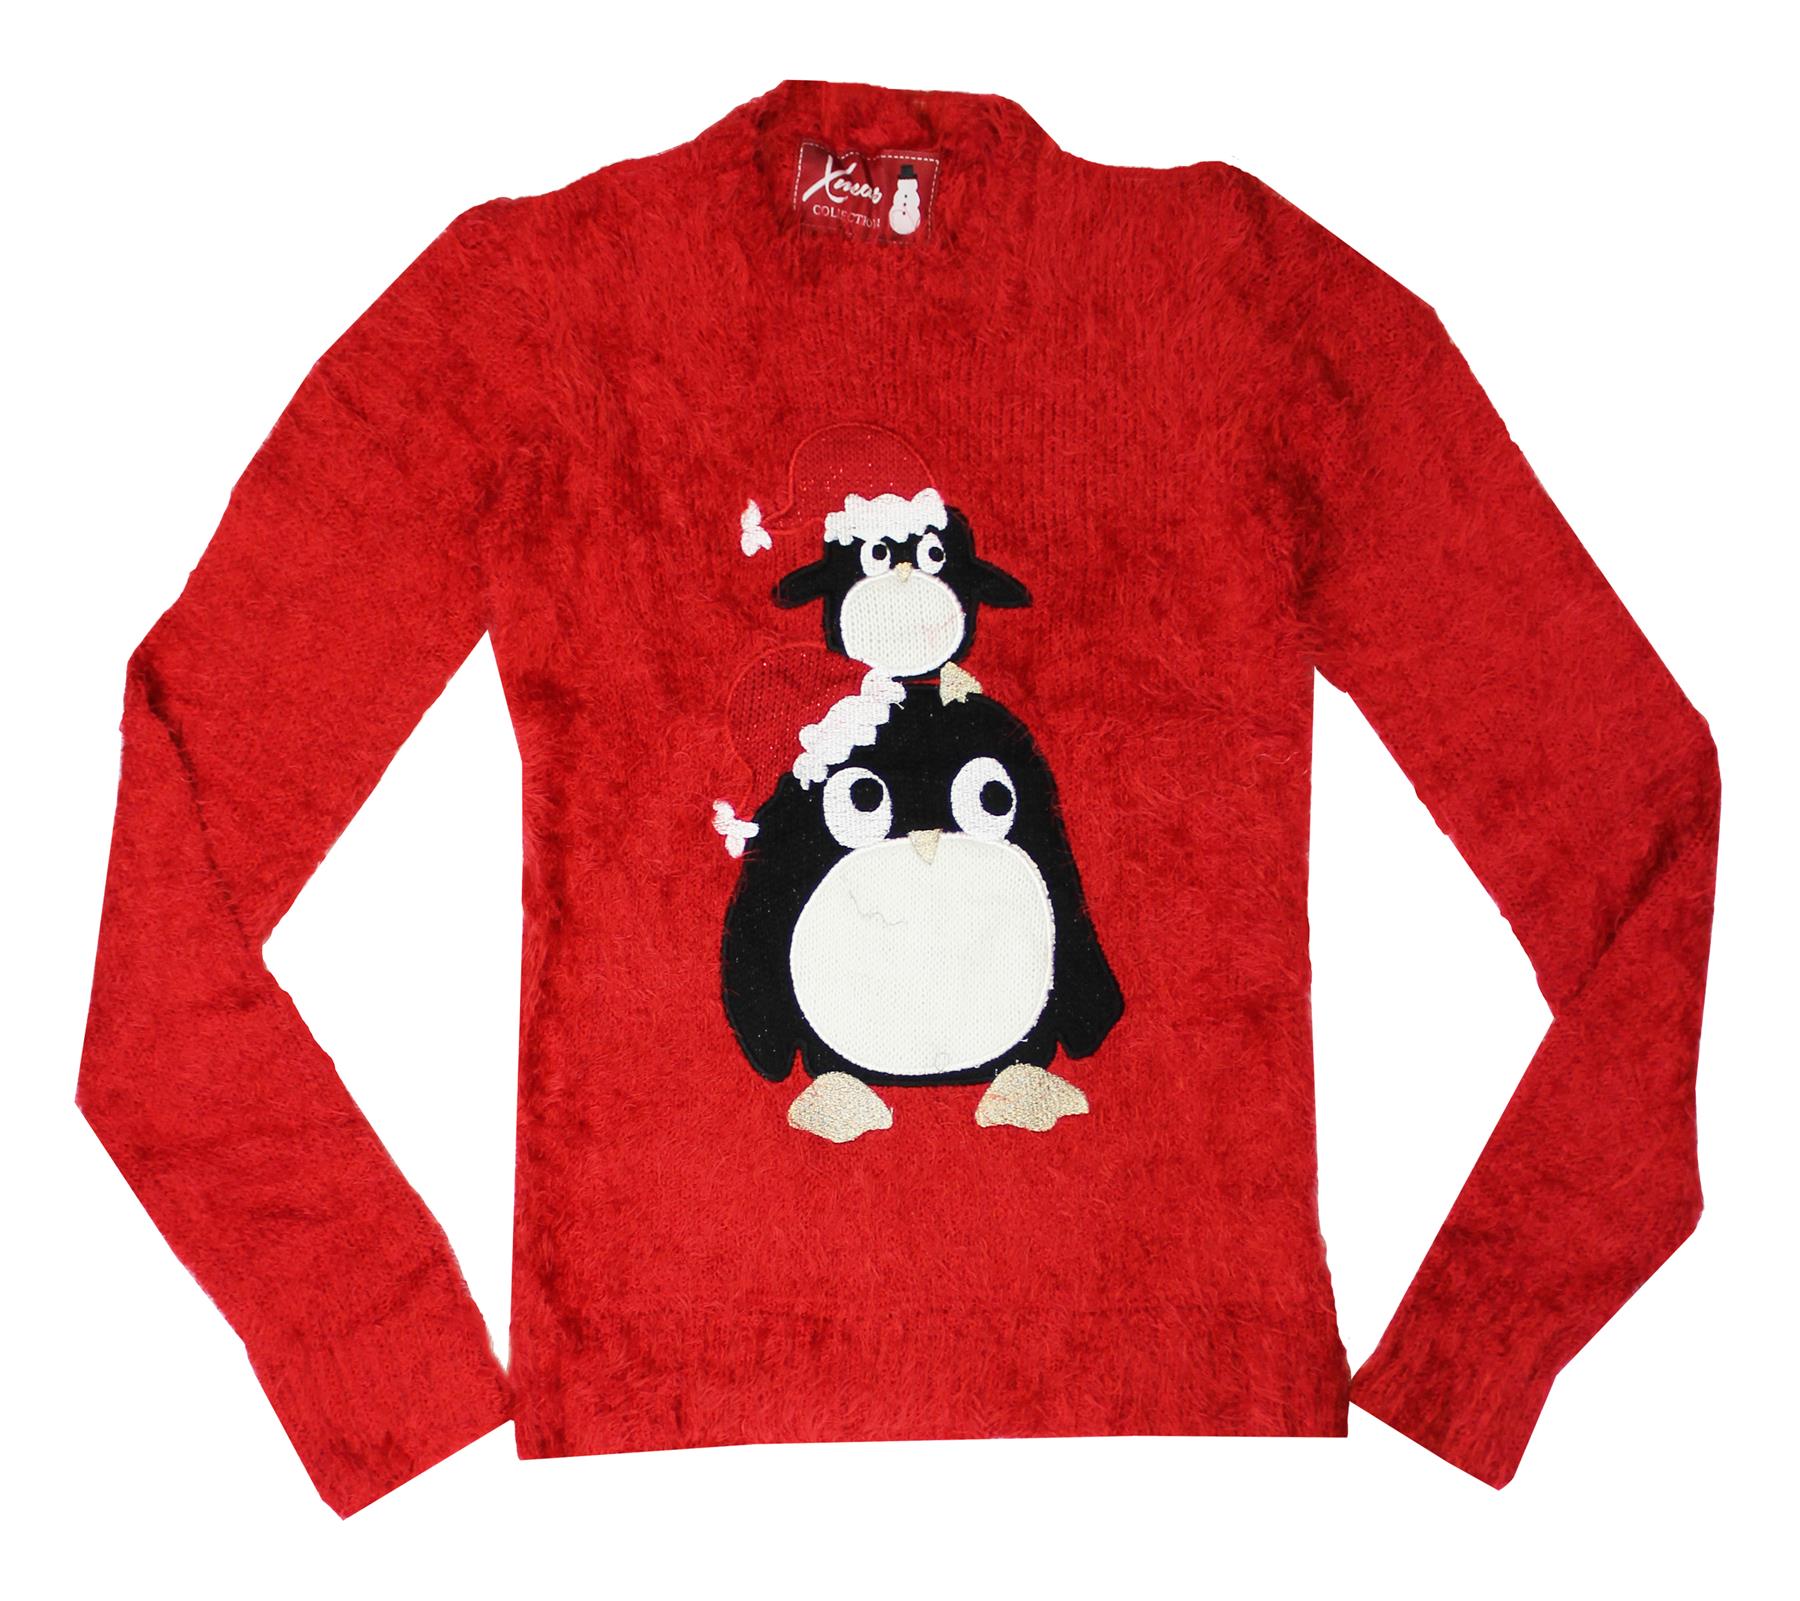 Christmas Collection 'Merry Christmas' Round Neck Long Sleeve Xmas Jumper